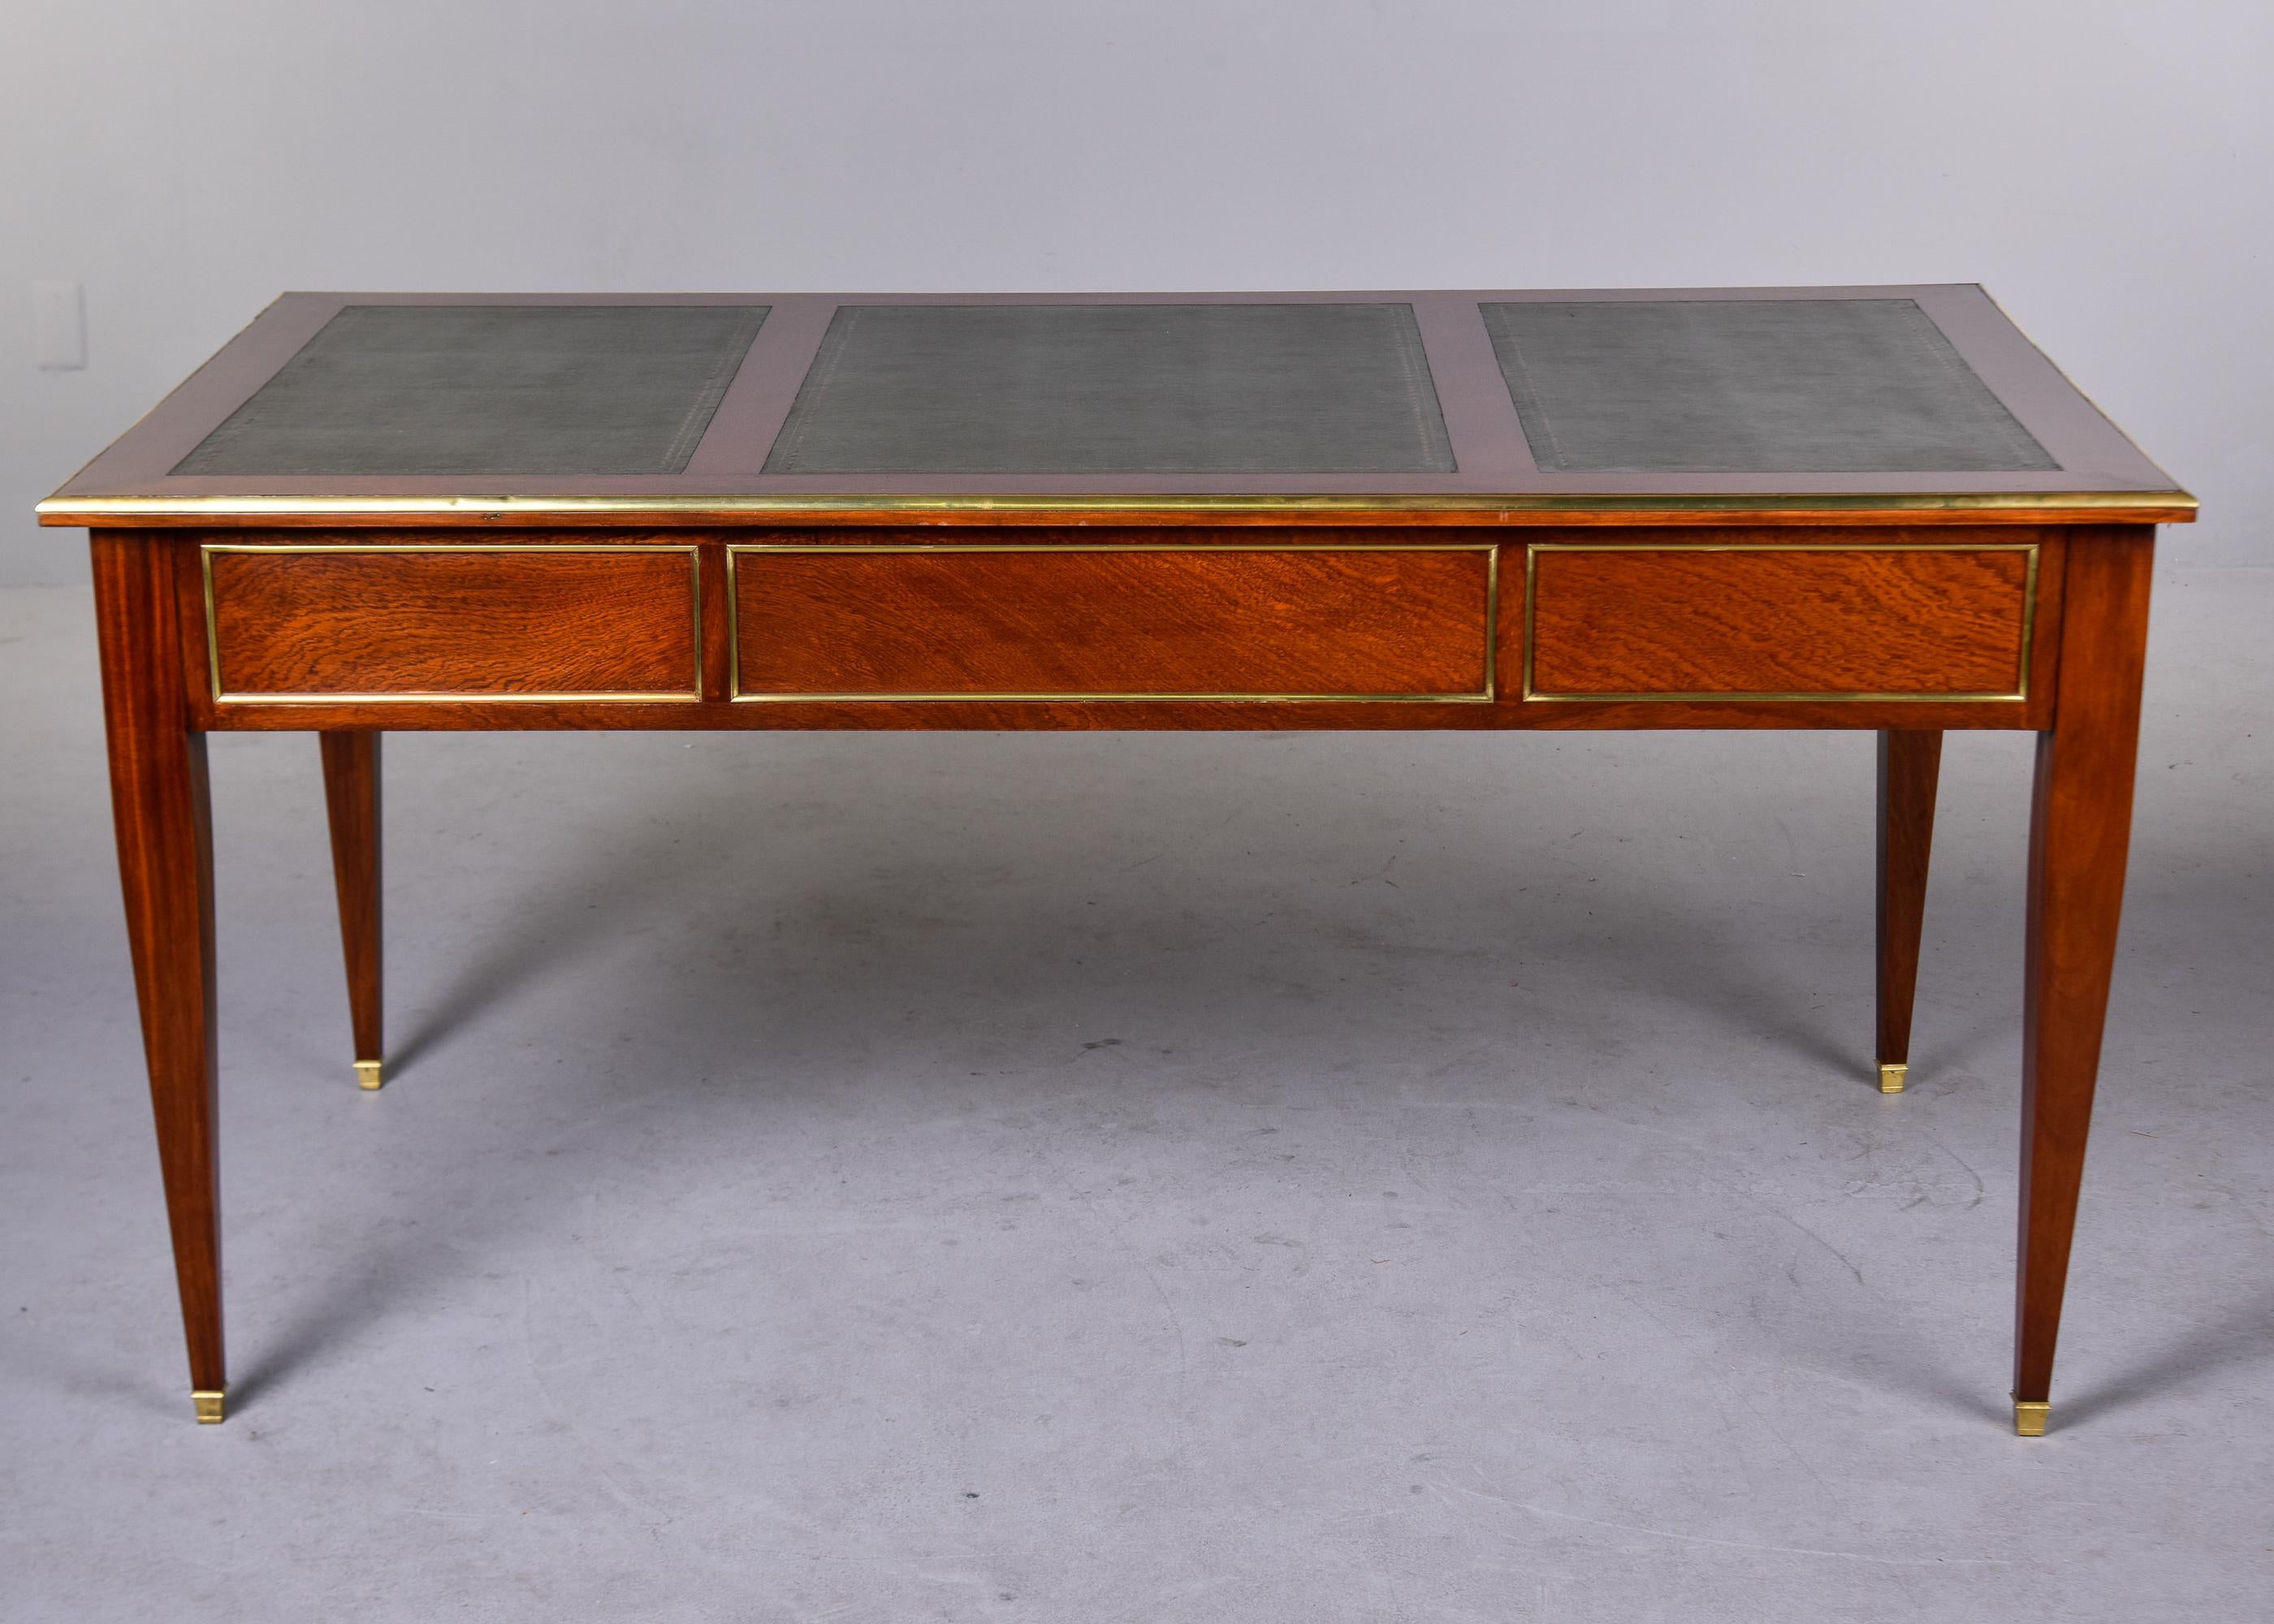 Early 19th Century Louis XVI Style Large Mahogany Desk with Green Leather Top For Sale 5